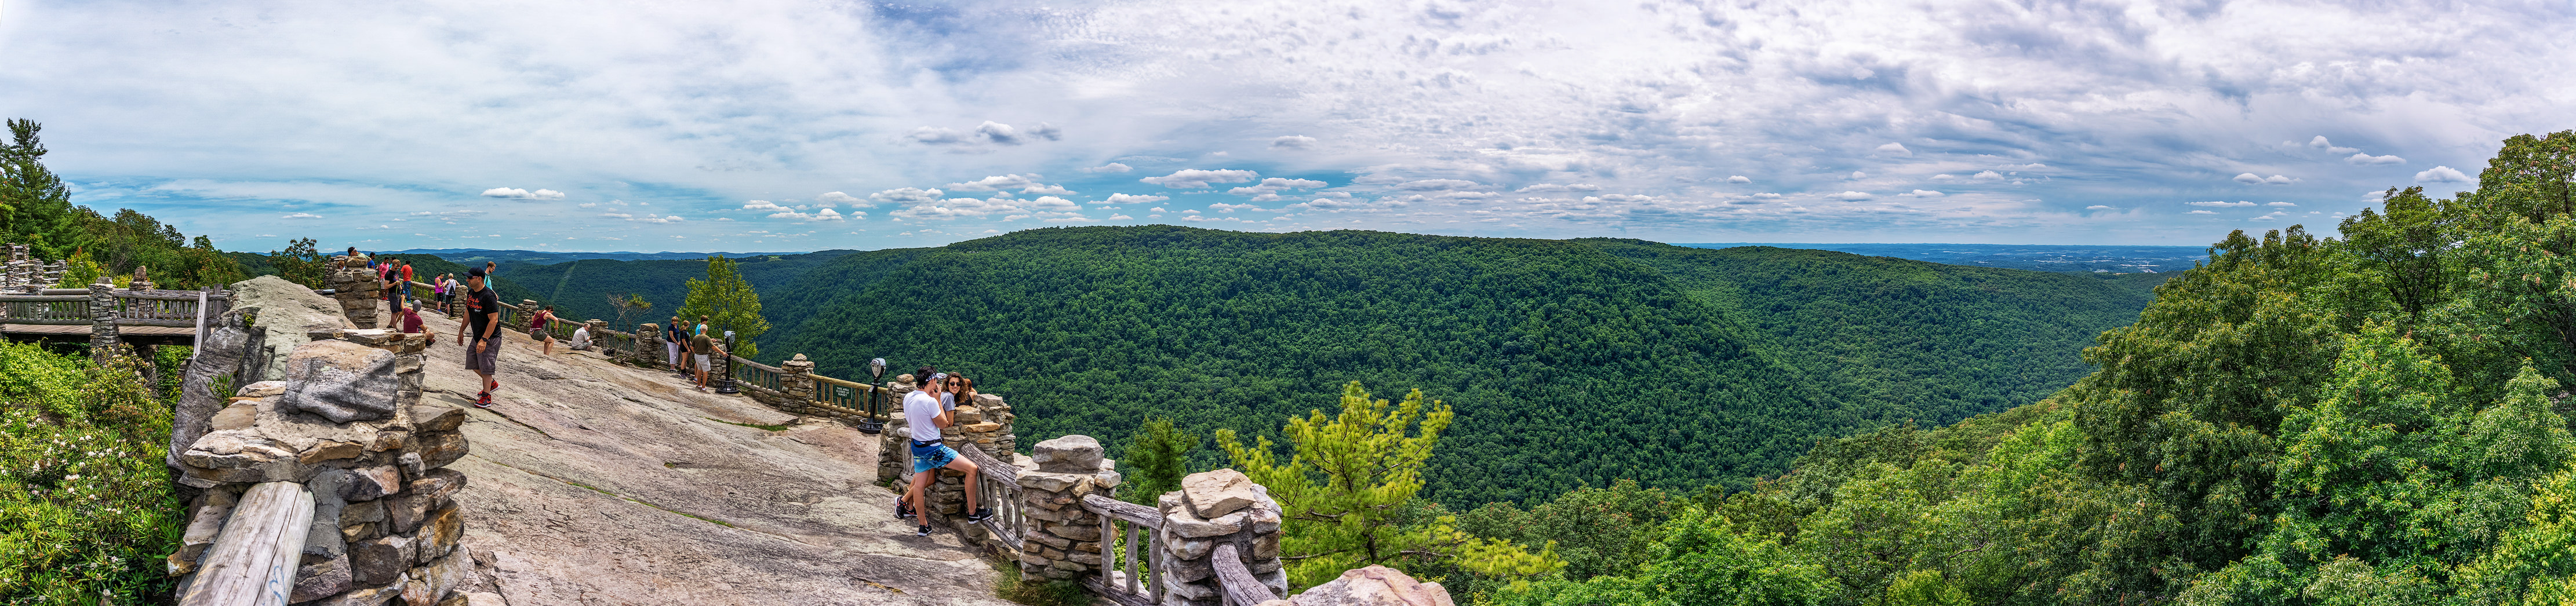 coopers rock panorama